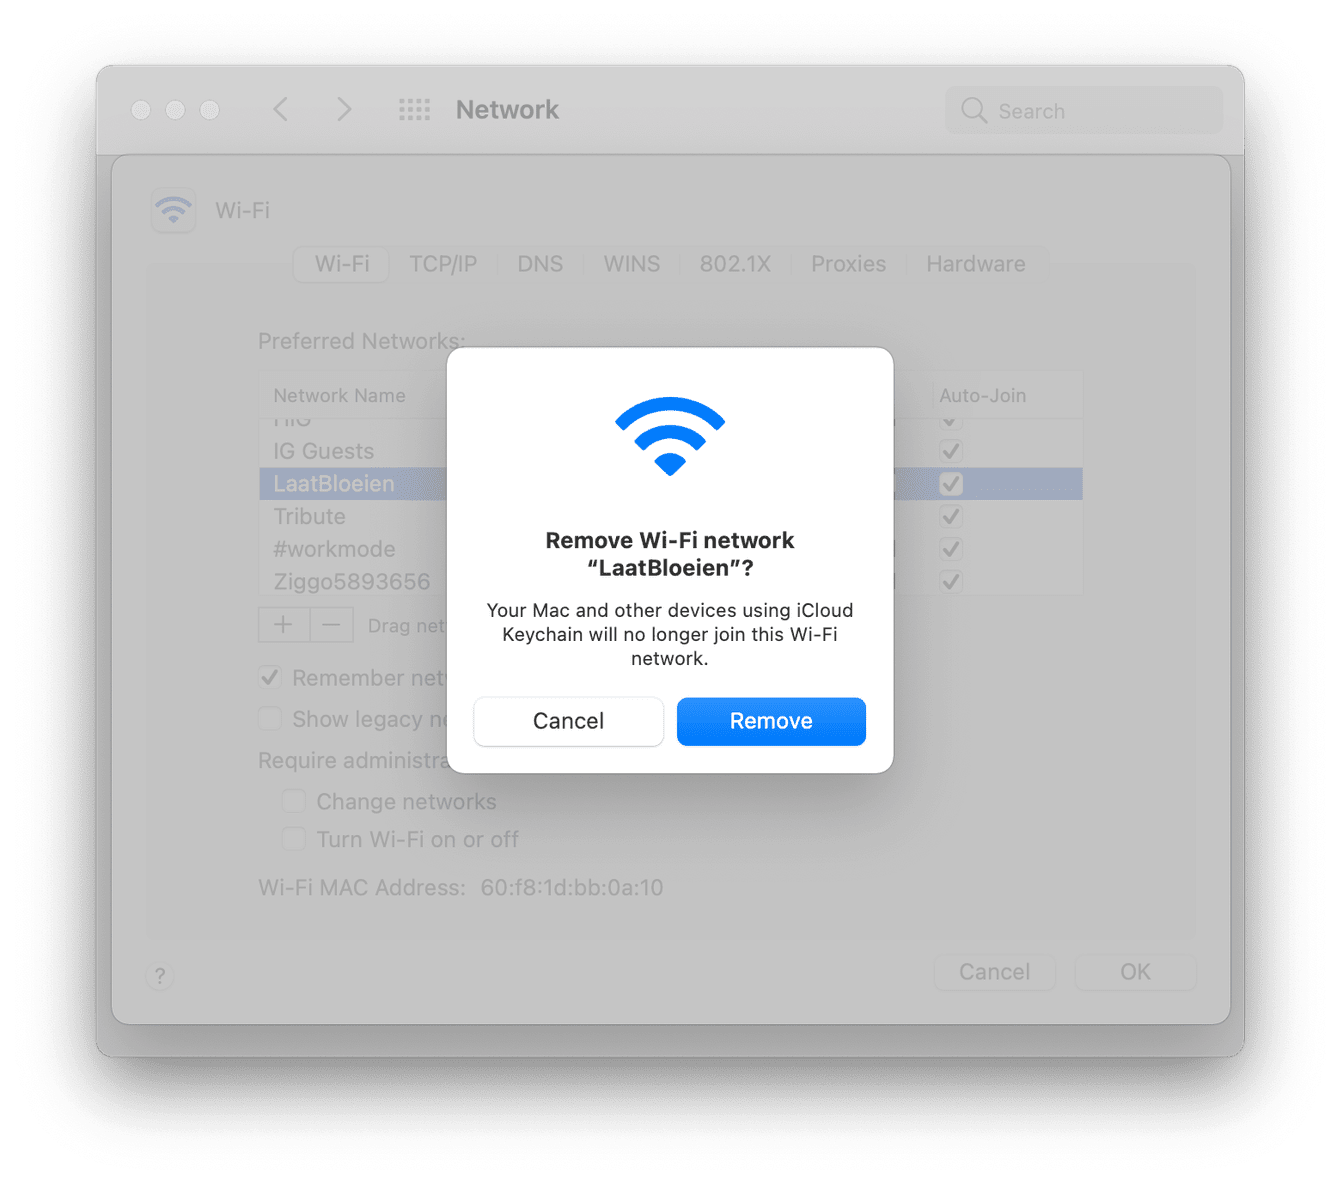 How to forget Wi-FI network on Mac